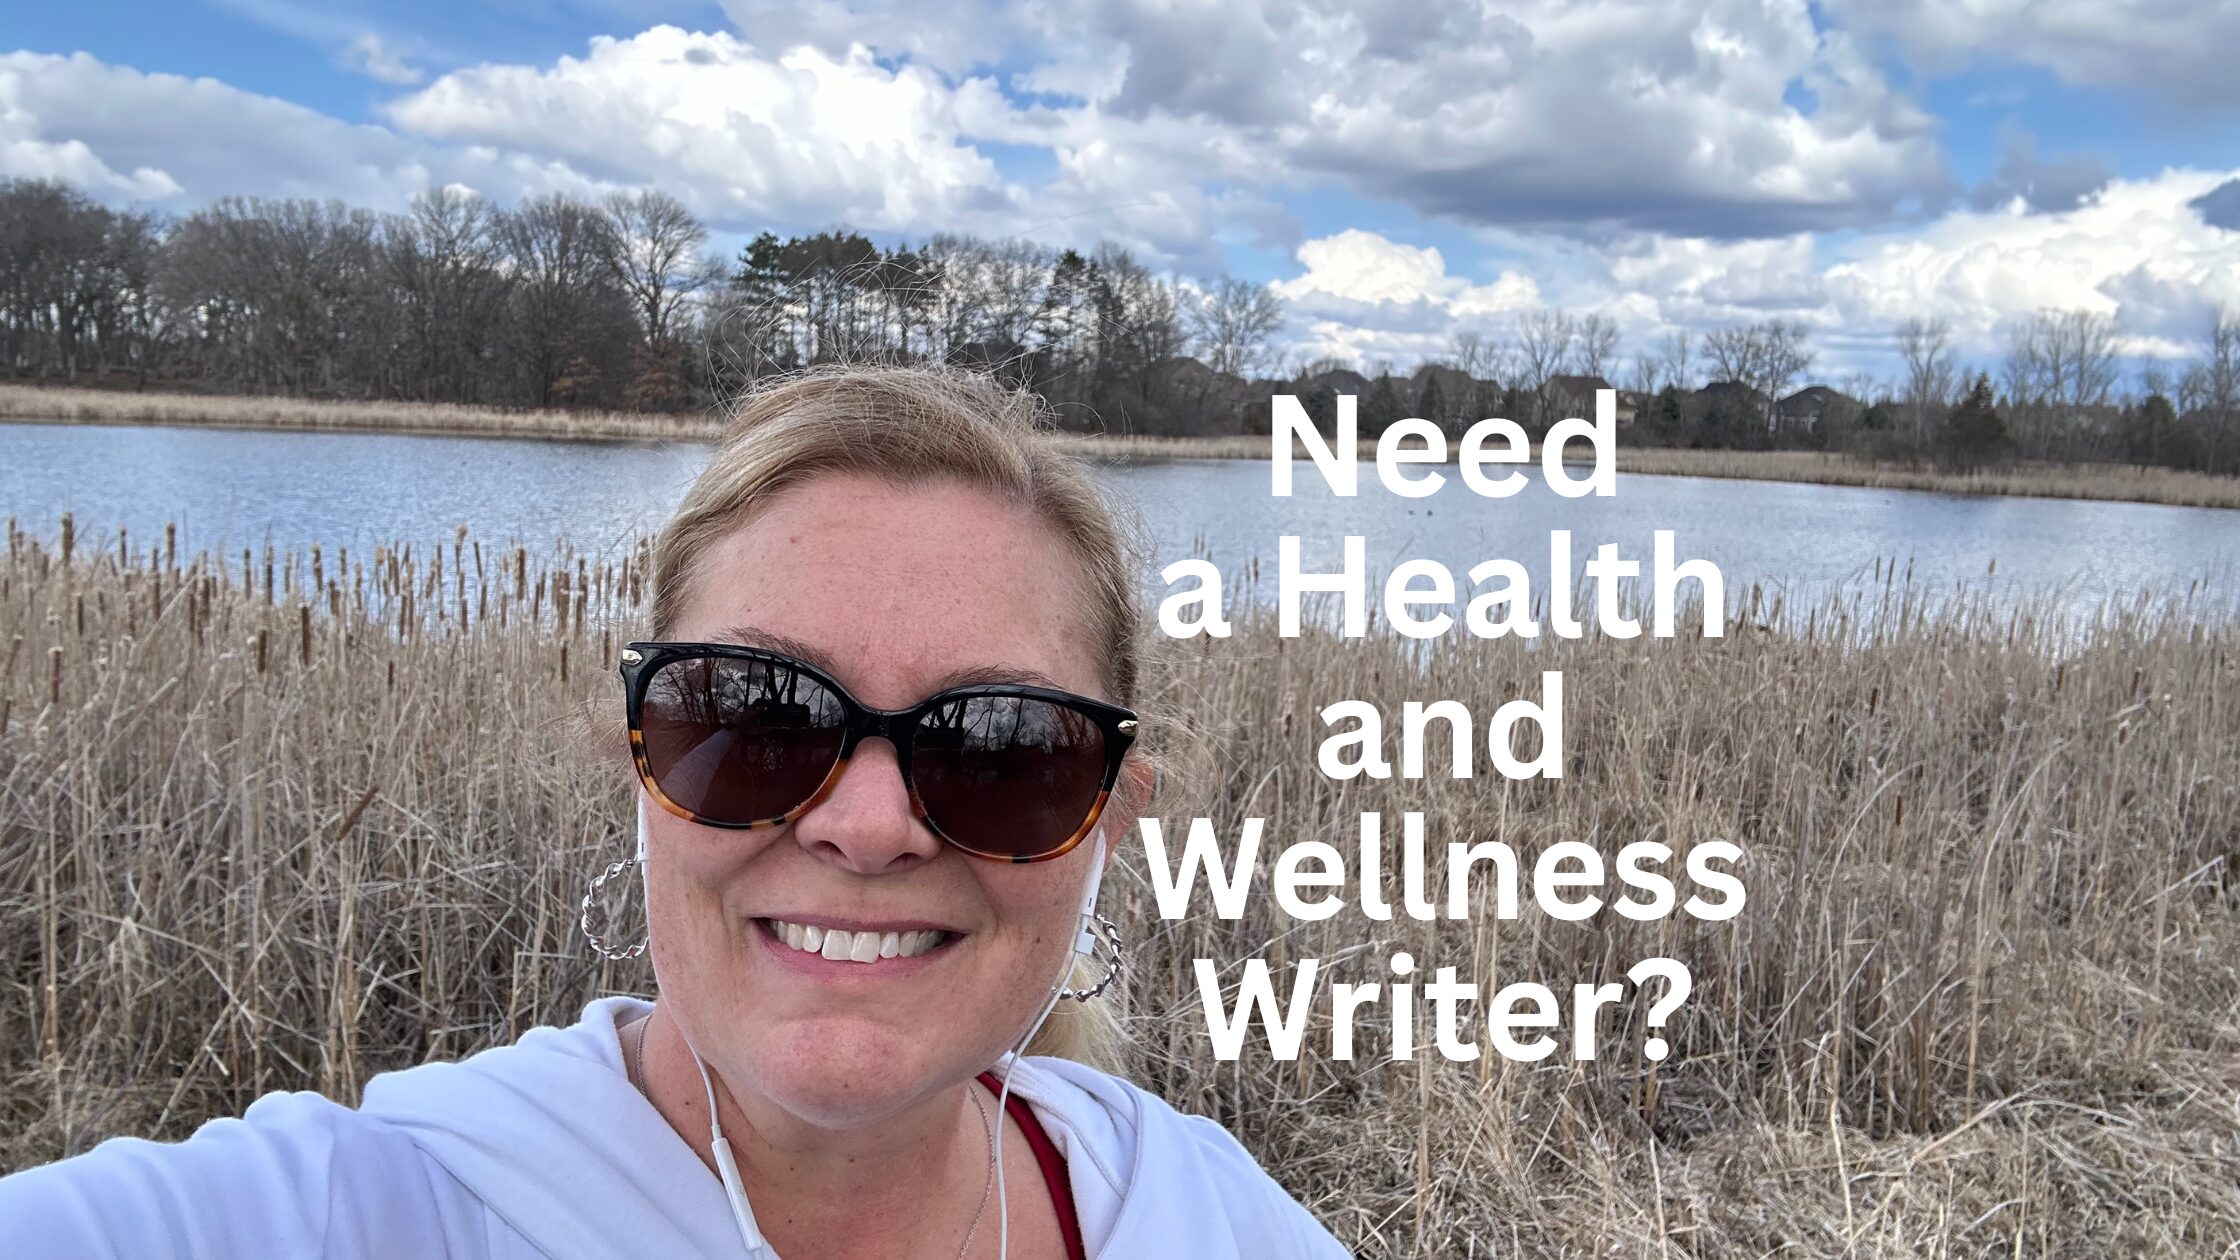 7 Things to Look for in a Health and Wellness Writer